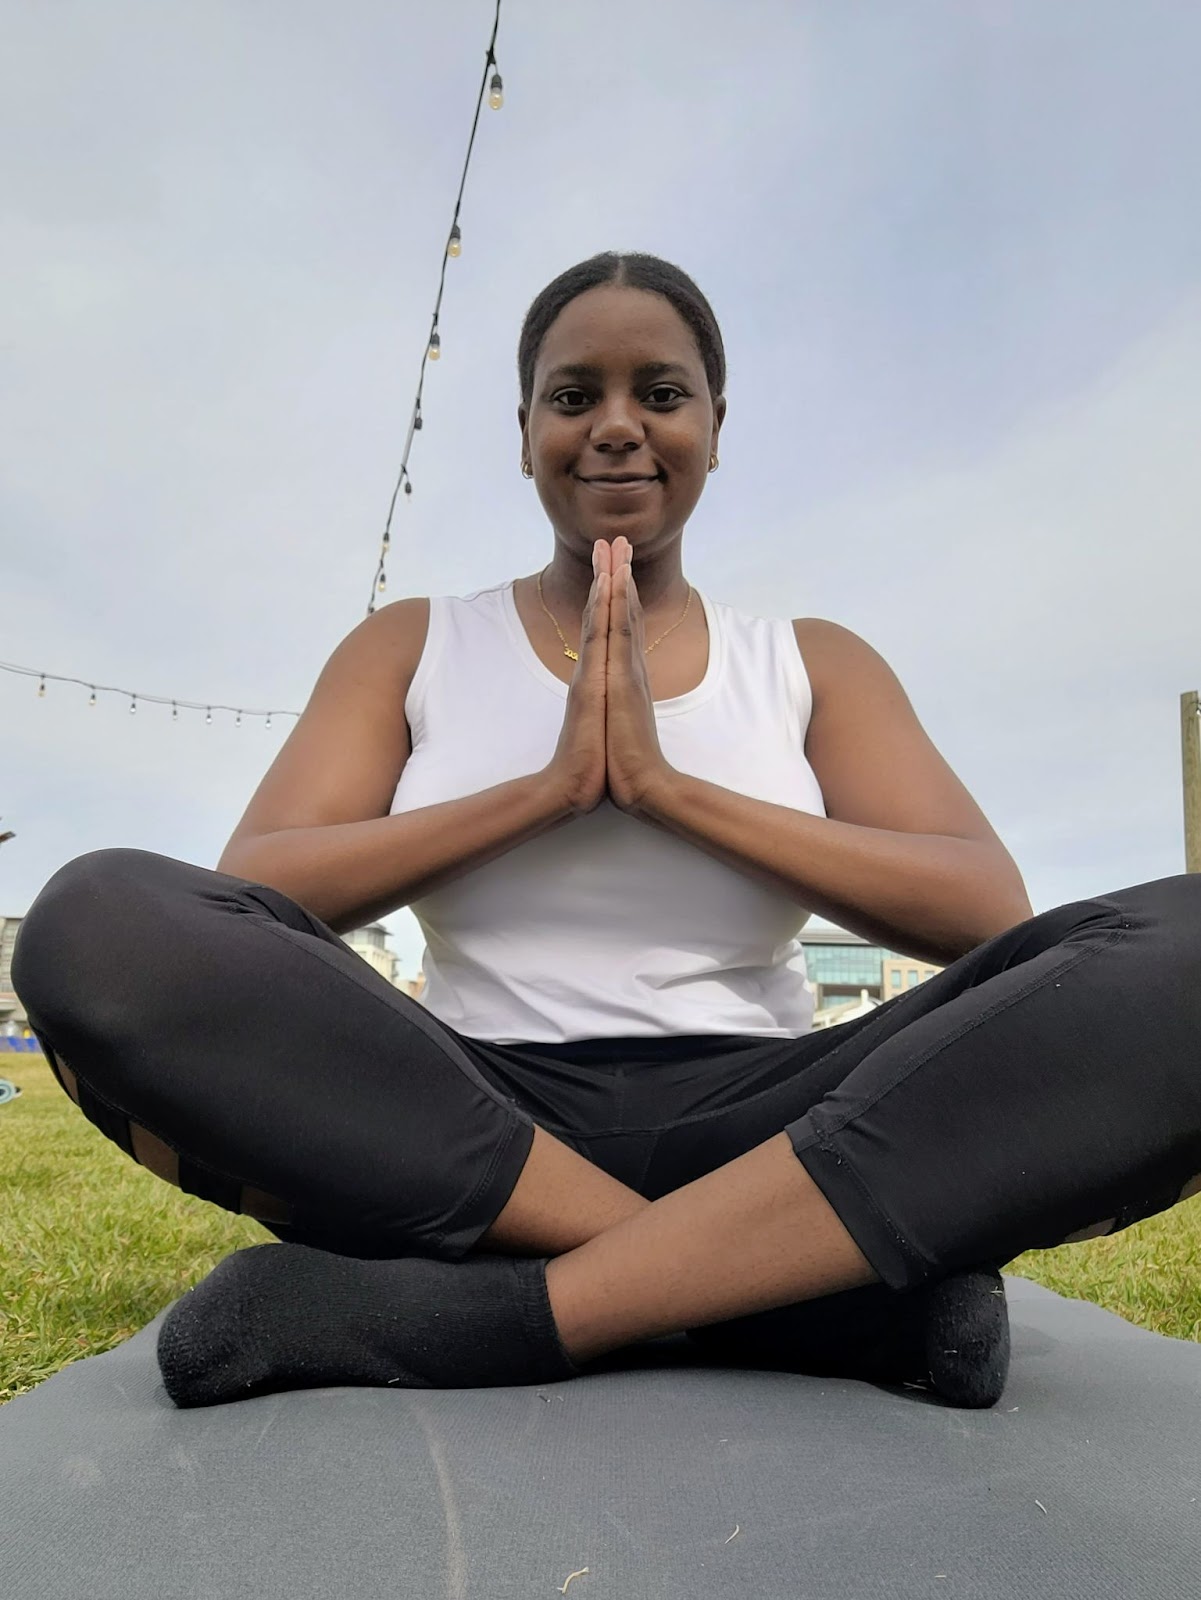 A picture of a black woman doing a yoga pose